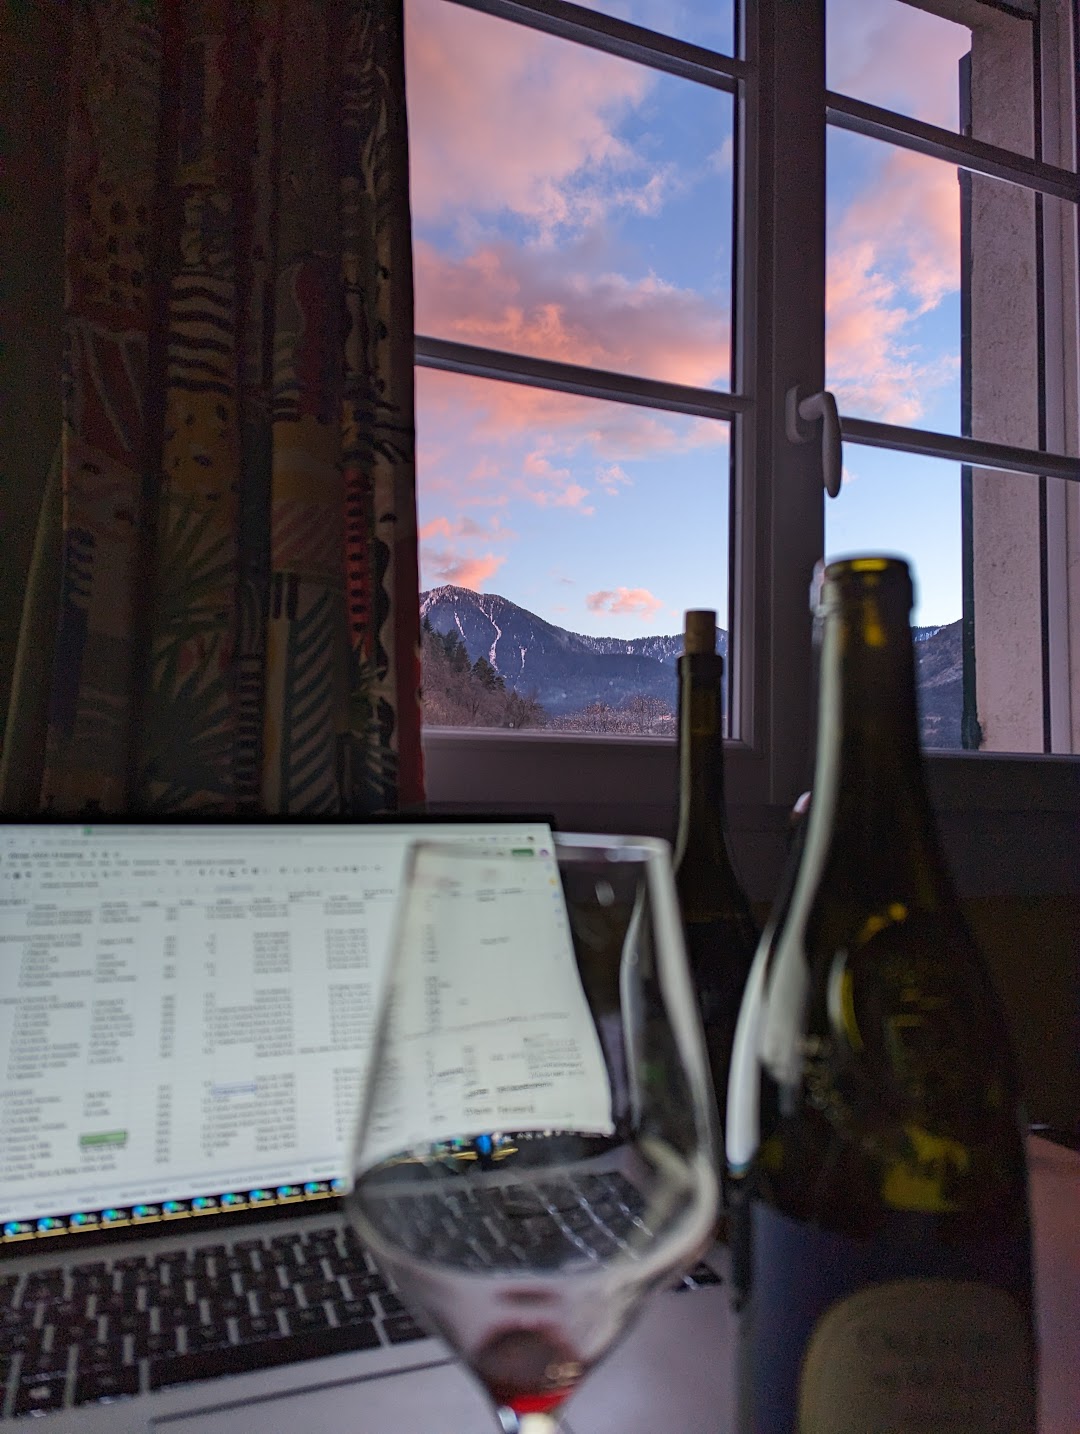 Wine tasting with a sunset in the background and a laptop showing a spreadsheet